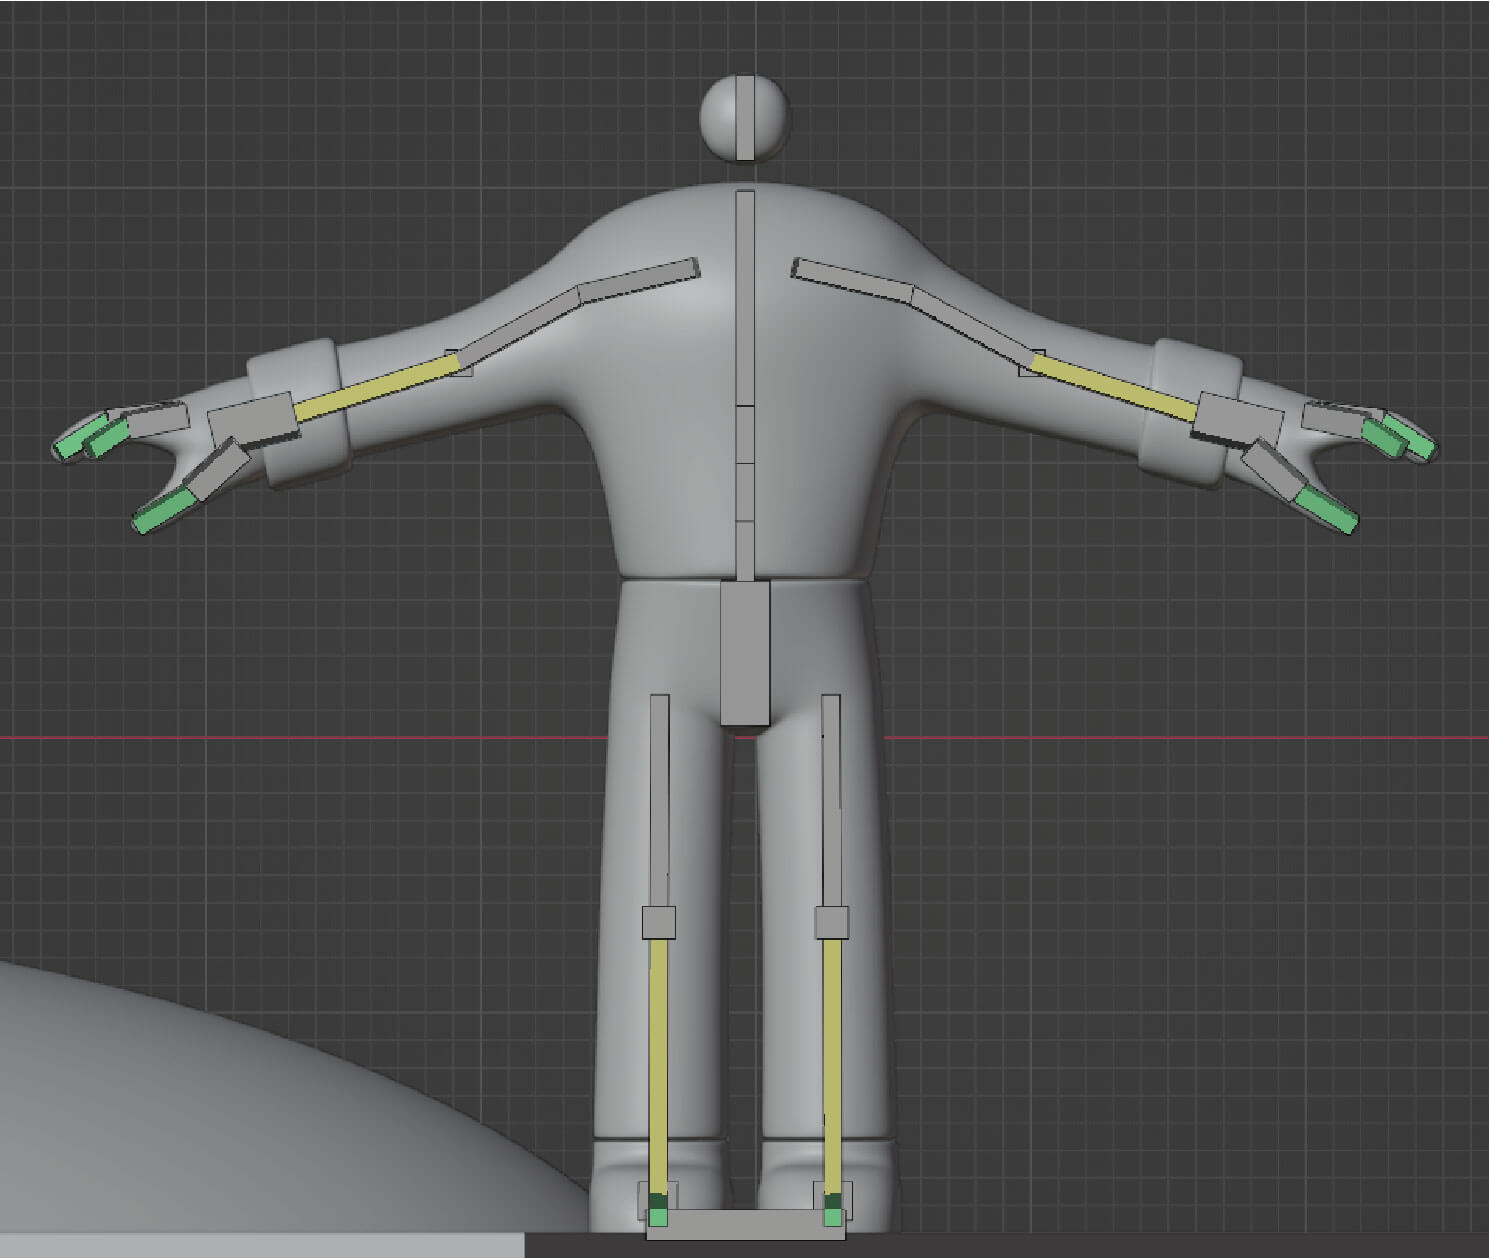 Basic character 3D model in T pose and rigged